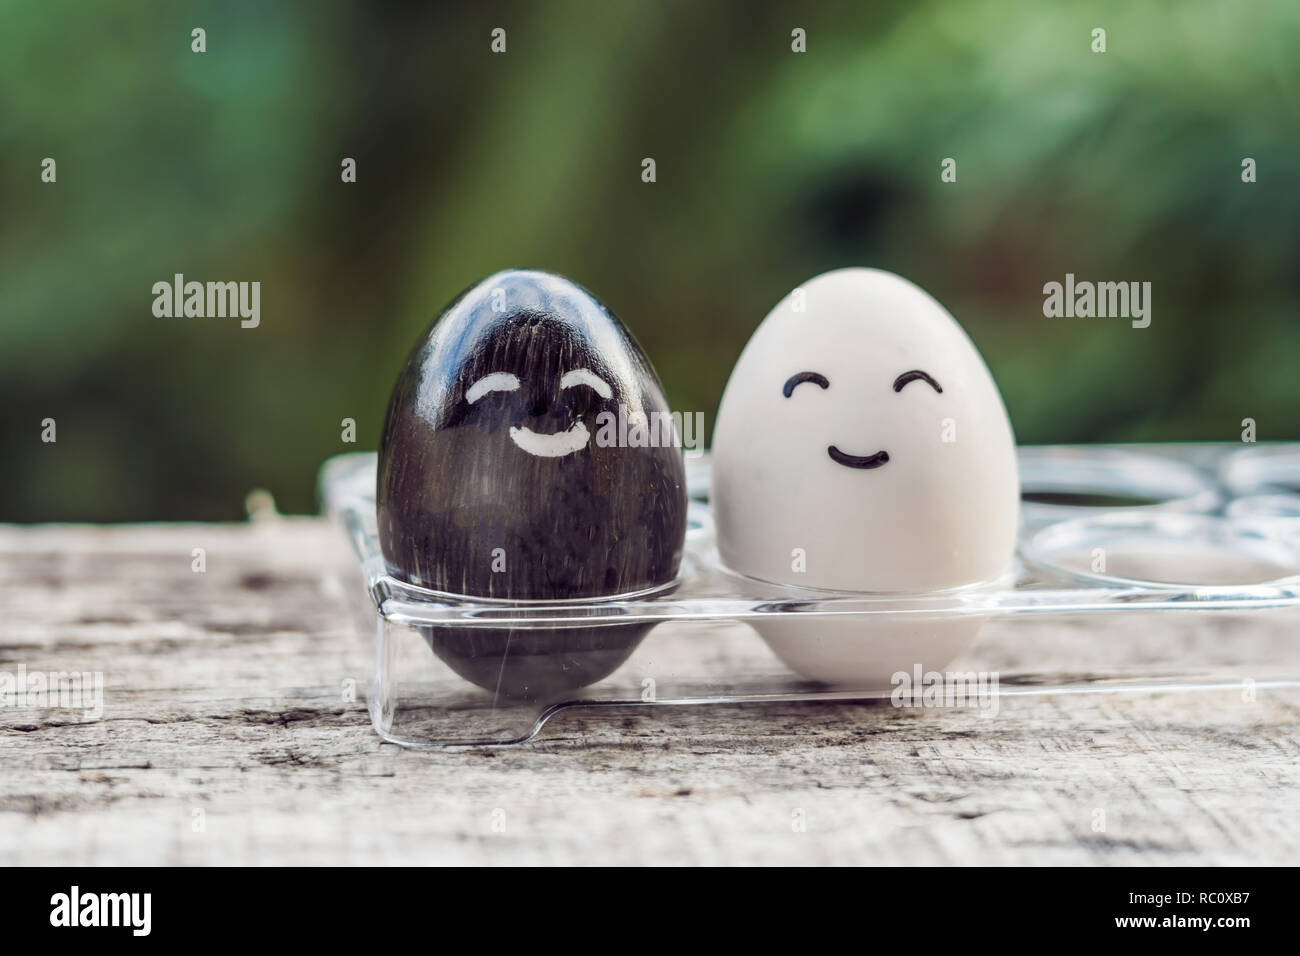 interracial marriage concept. Black and white egg as a pair of different races. Stock Photo